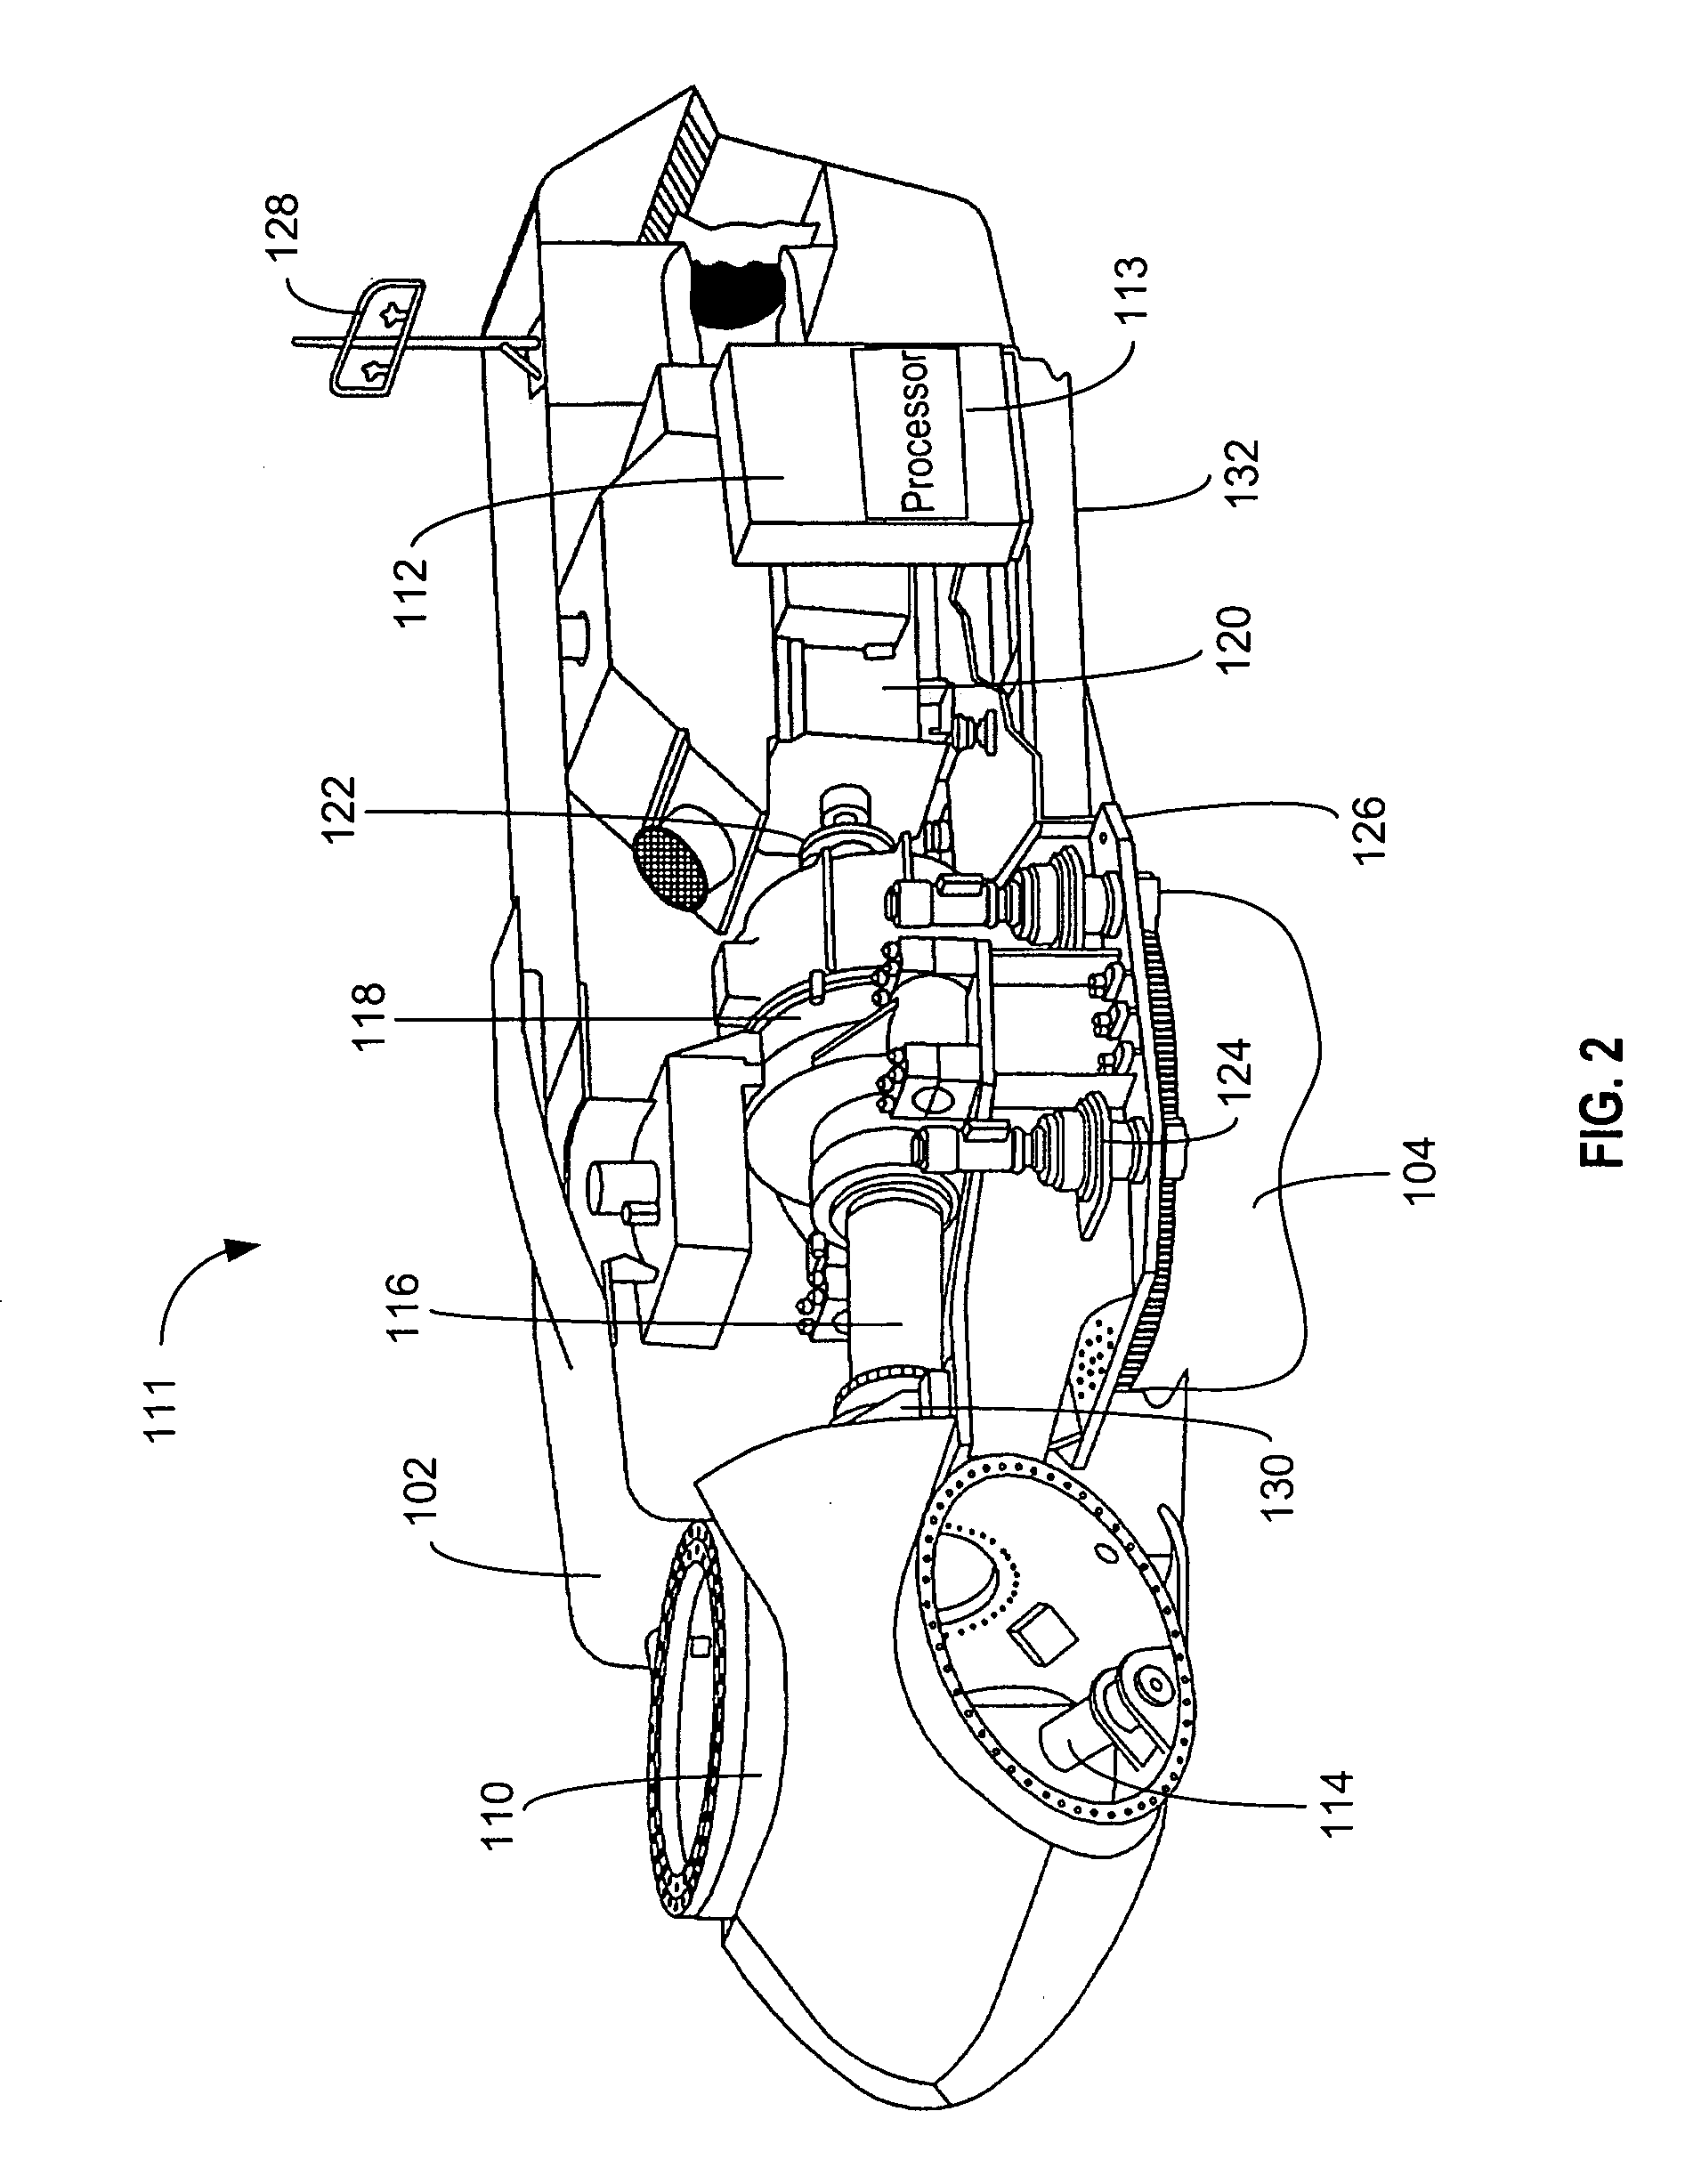 Systems and methods for directing a current